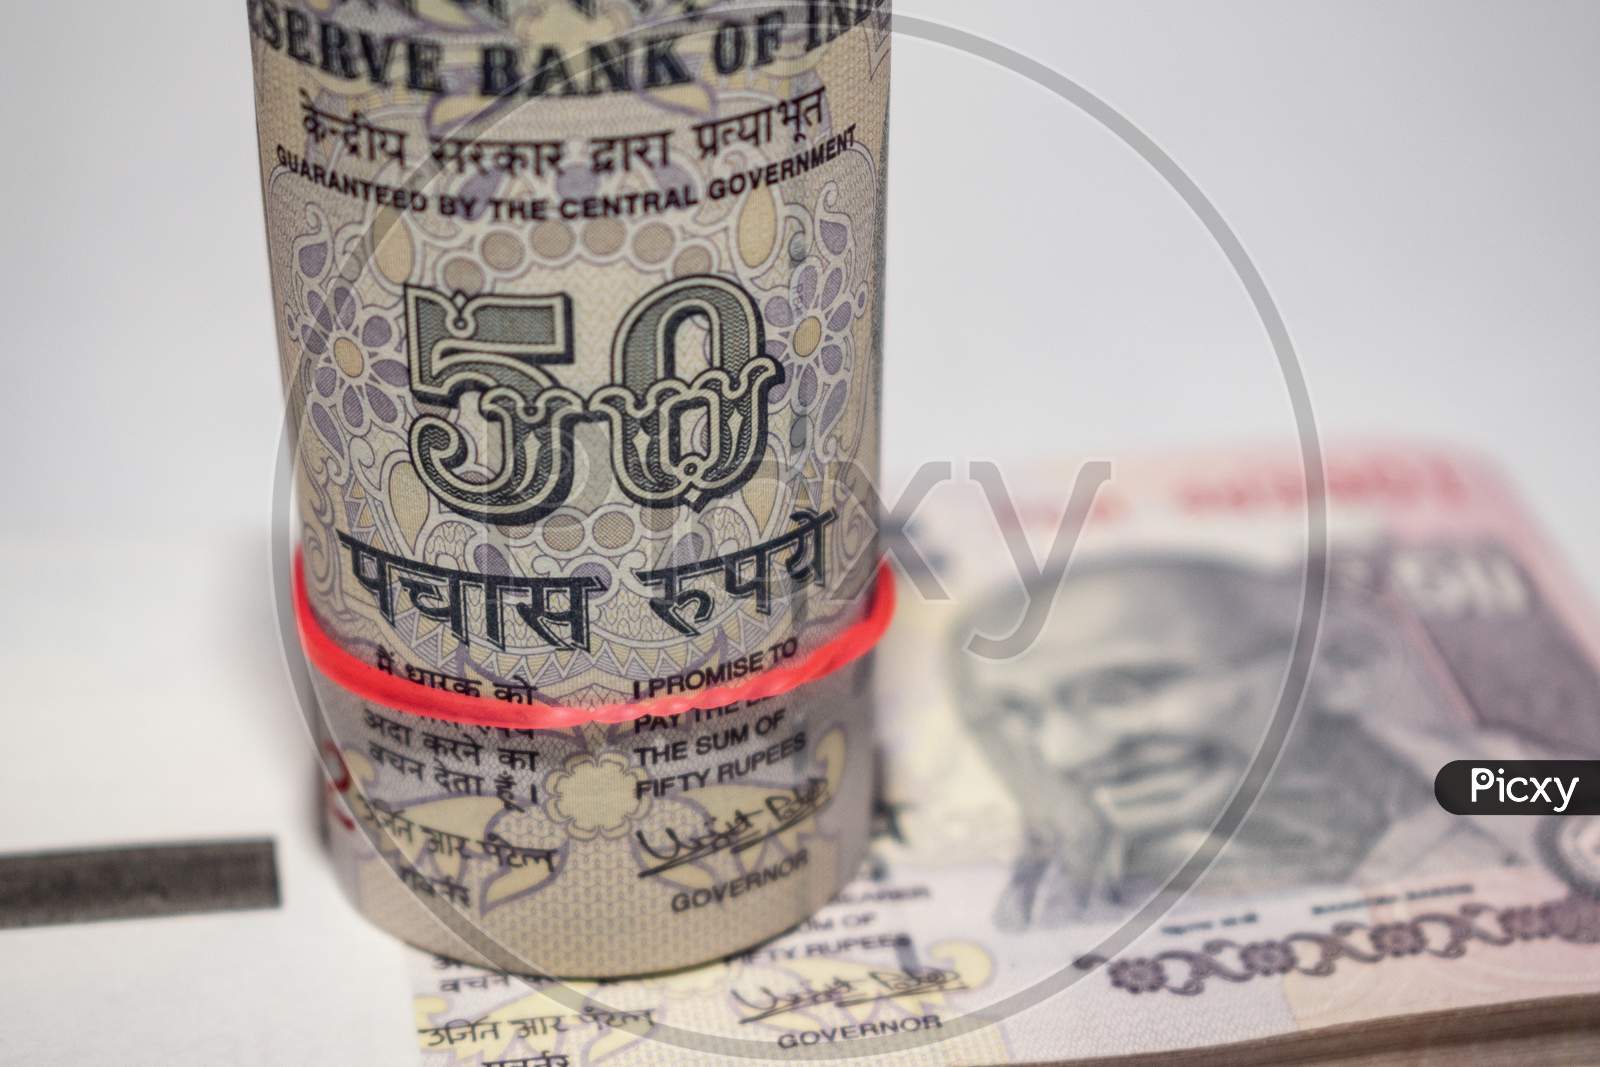 Roll of Indian currency notes of 50 rupees put on the bundle of notes